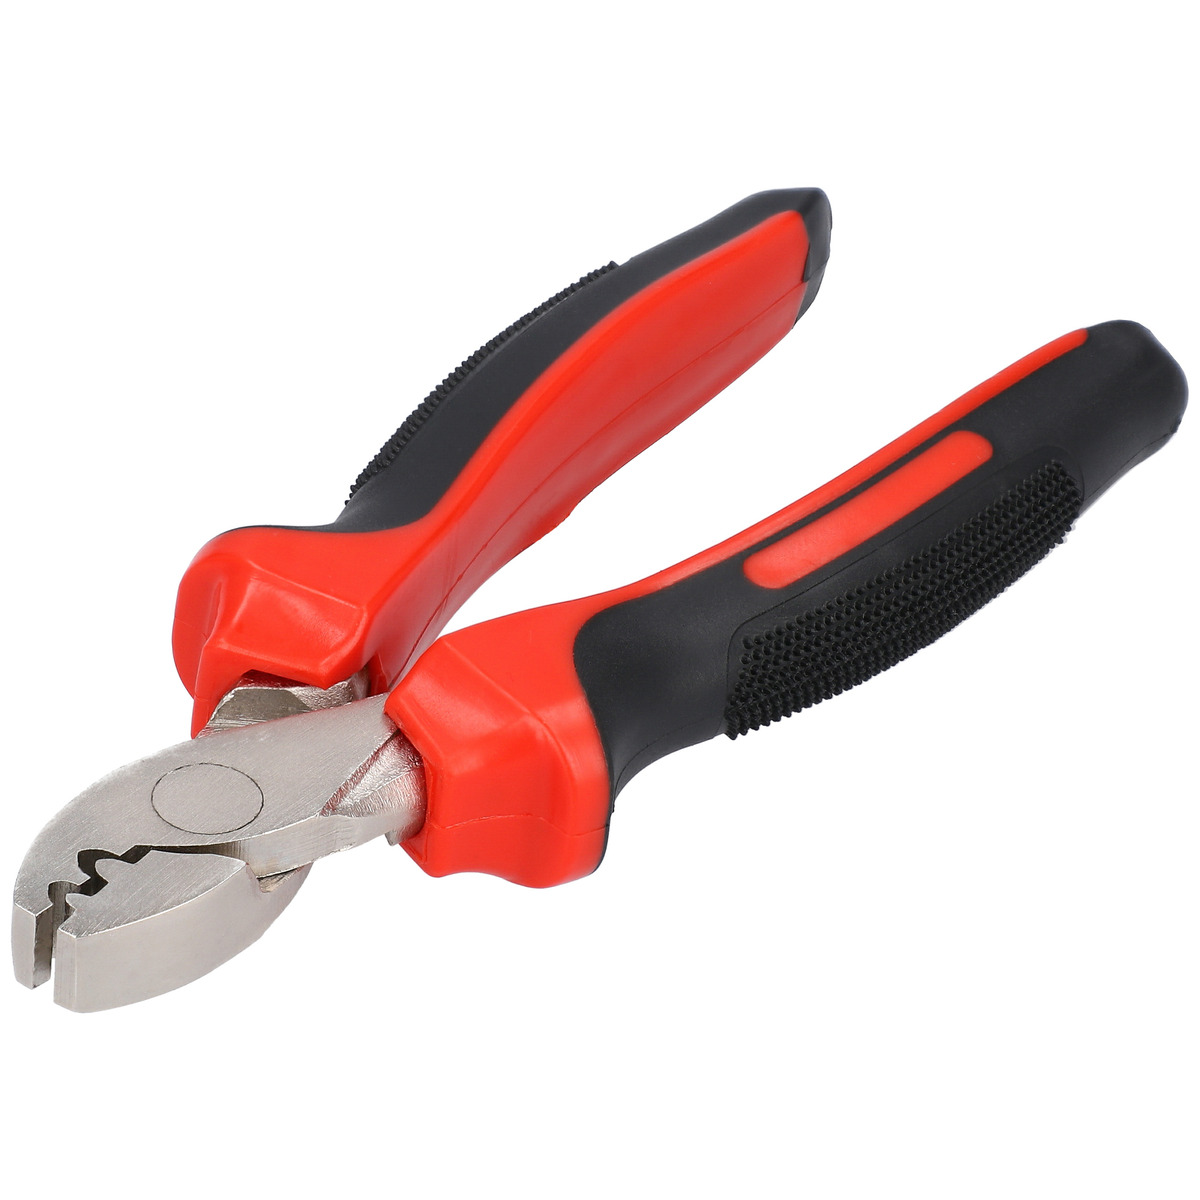 Mikado Pliers - CLAMPING FOR SLEEVE 14 cm